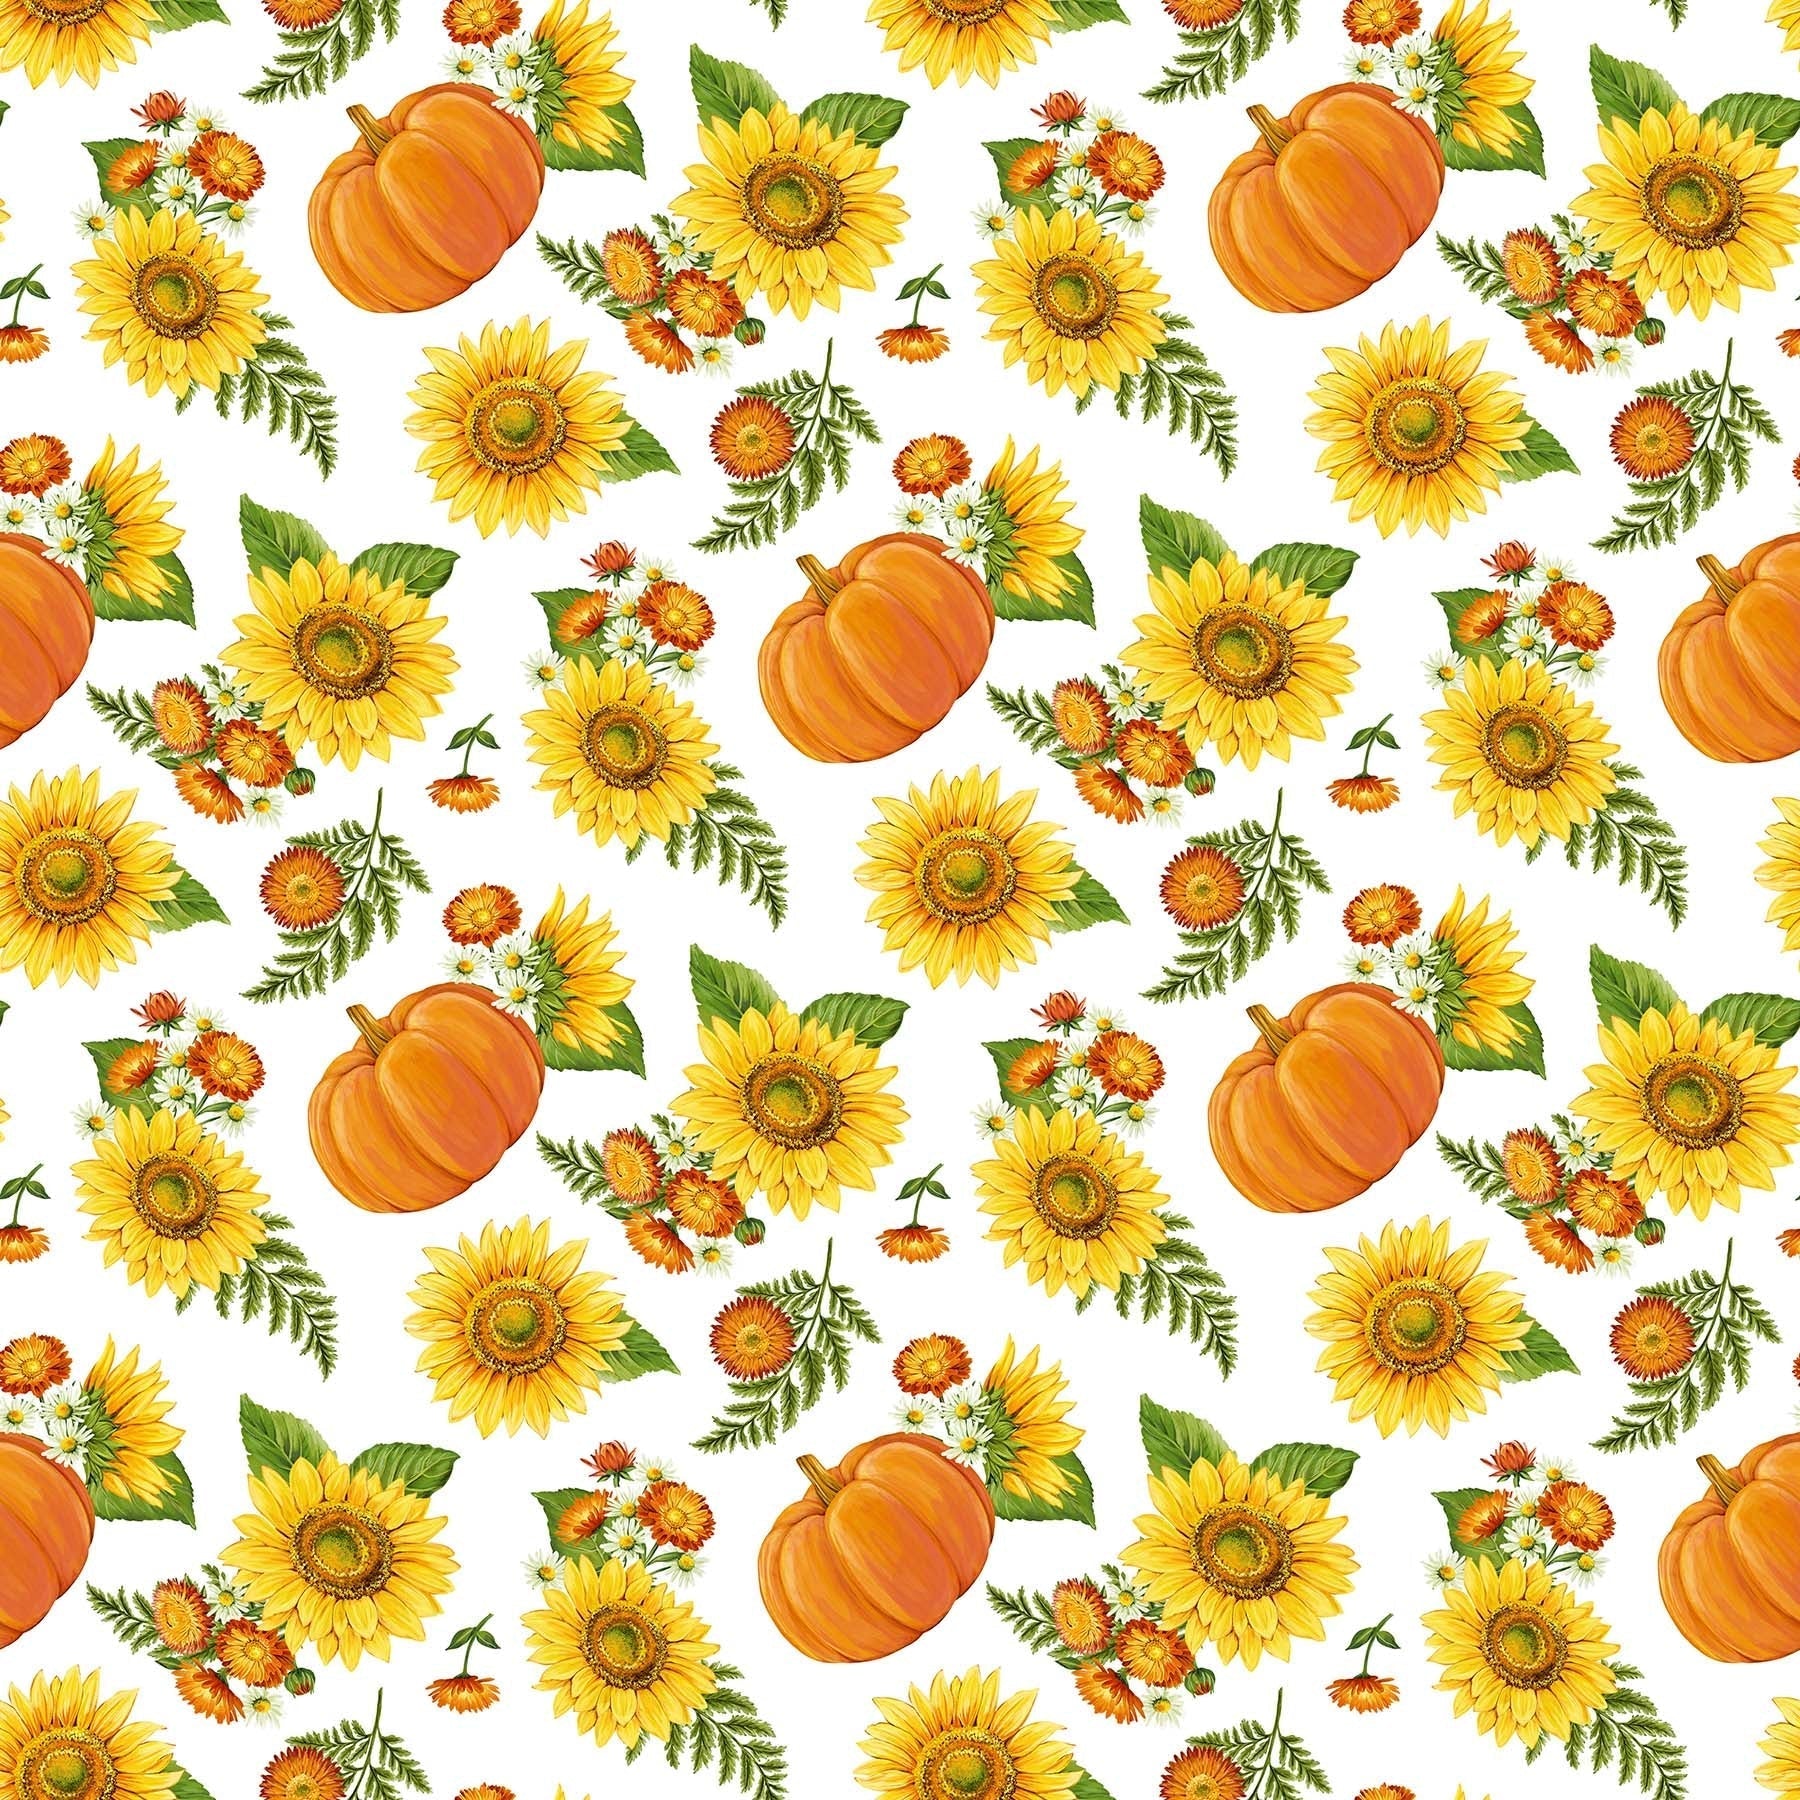 Northcott Fabric by the Yard Sunshine Harvest Daisies on Green Floral Cotton 25458-78